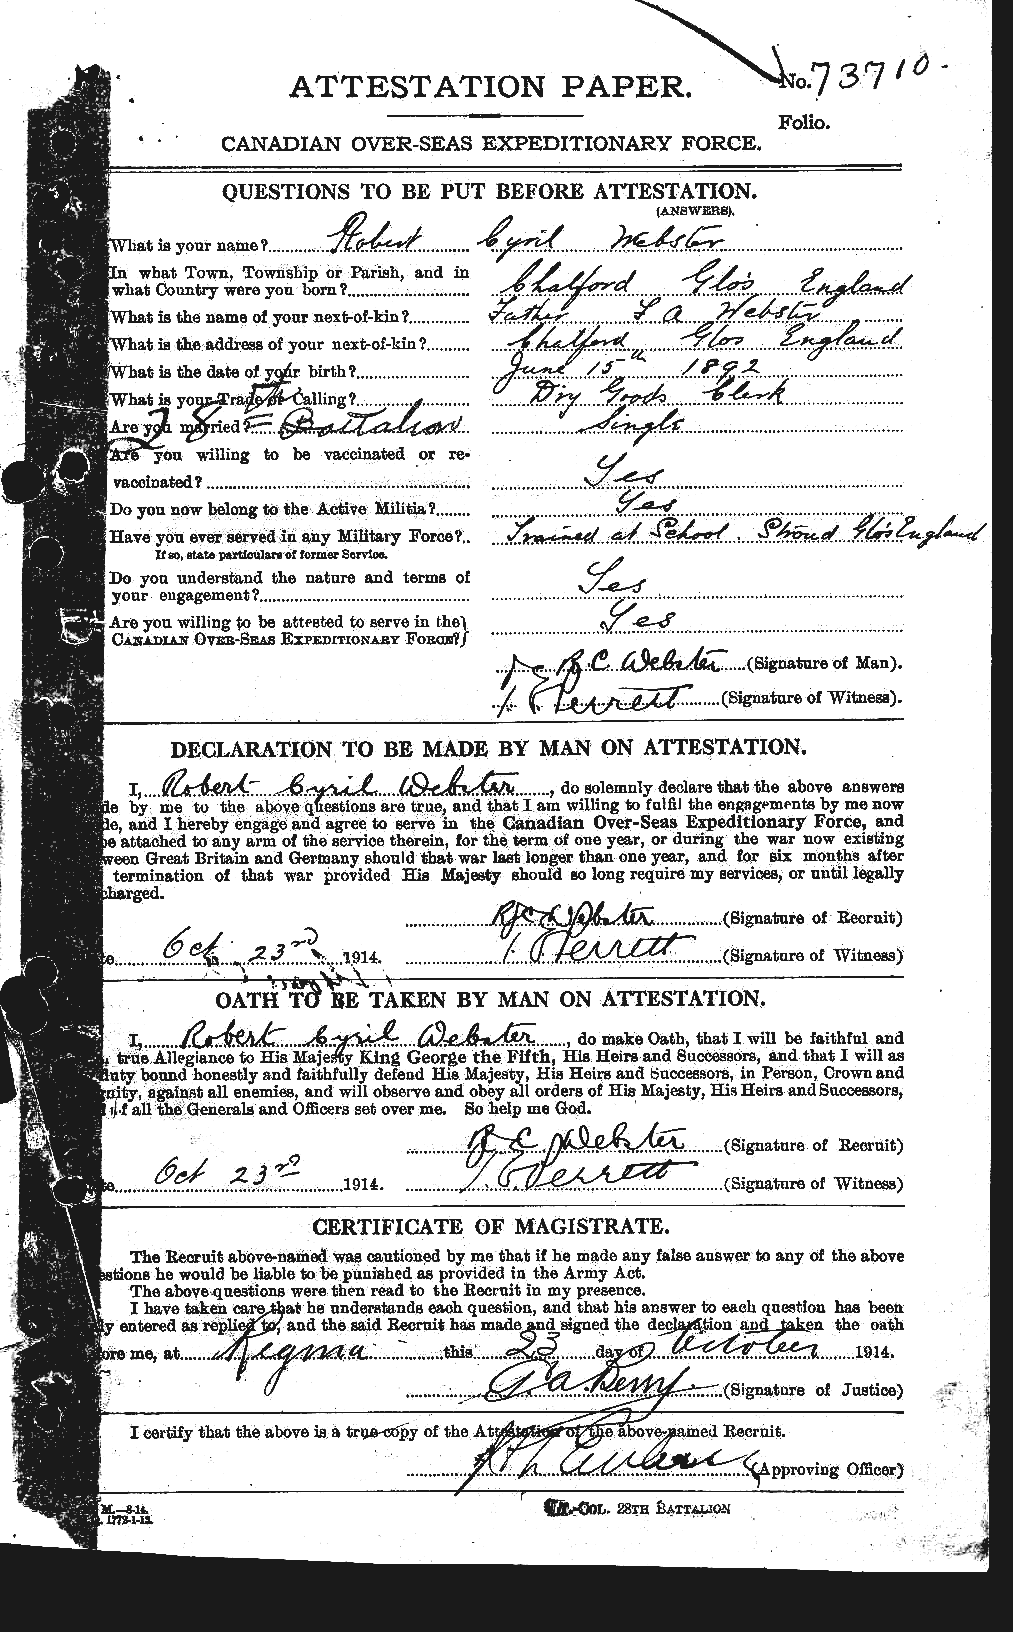 Personnel Records of the First World War - CEF 661961a